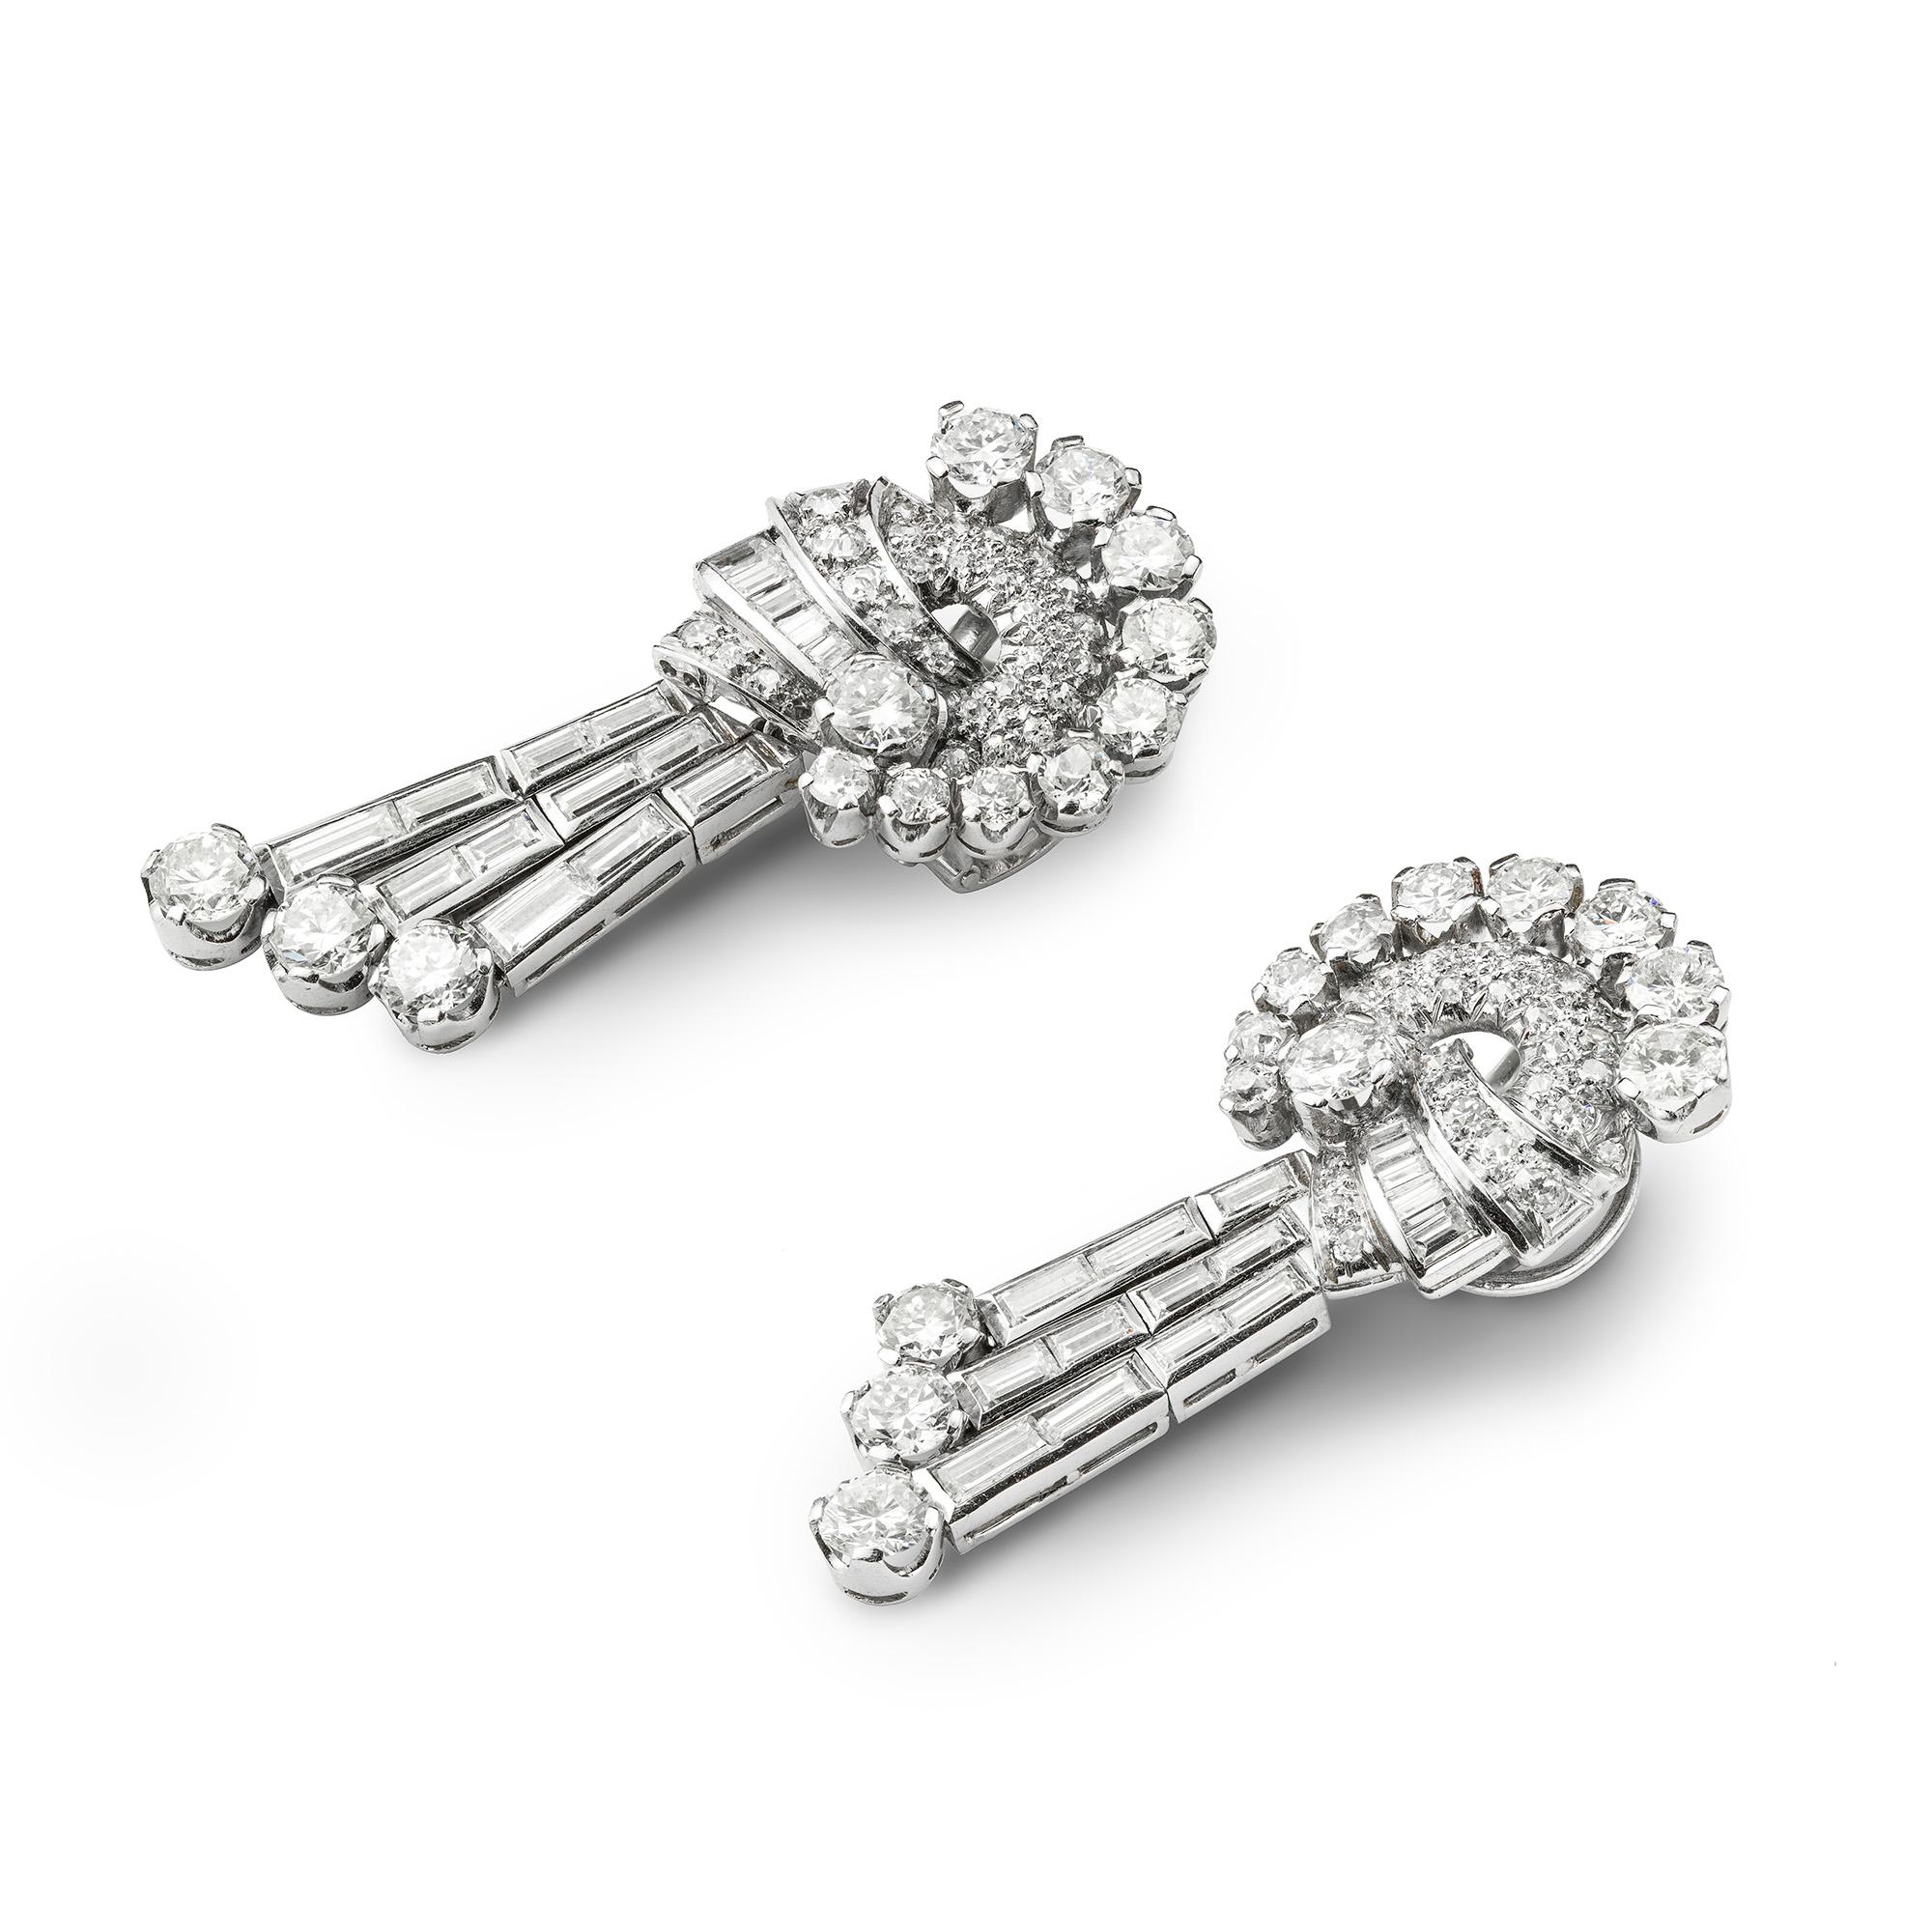 A Pair Of Mid 20th Century Diamond Drop Earrings, consisting of a triple line drop, all set with round brilliant, baguette and Swiss-cut diamonds estimated to weigh a total of 8 carats, mounted in platinum and white gold, with white gold clip